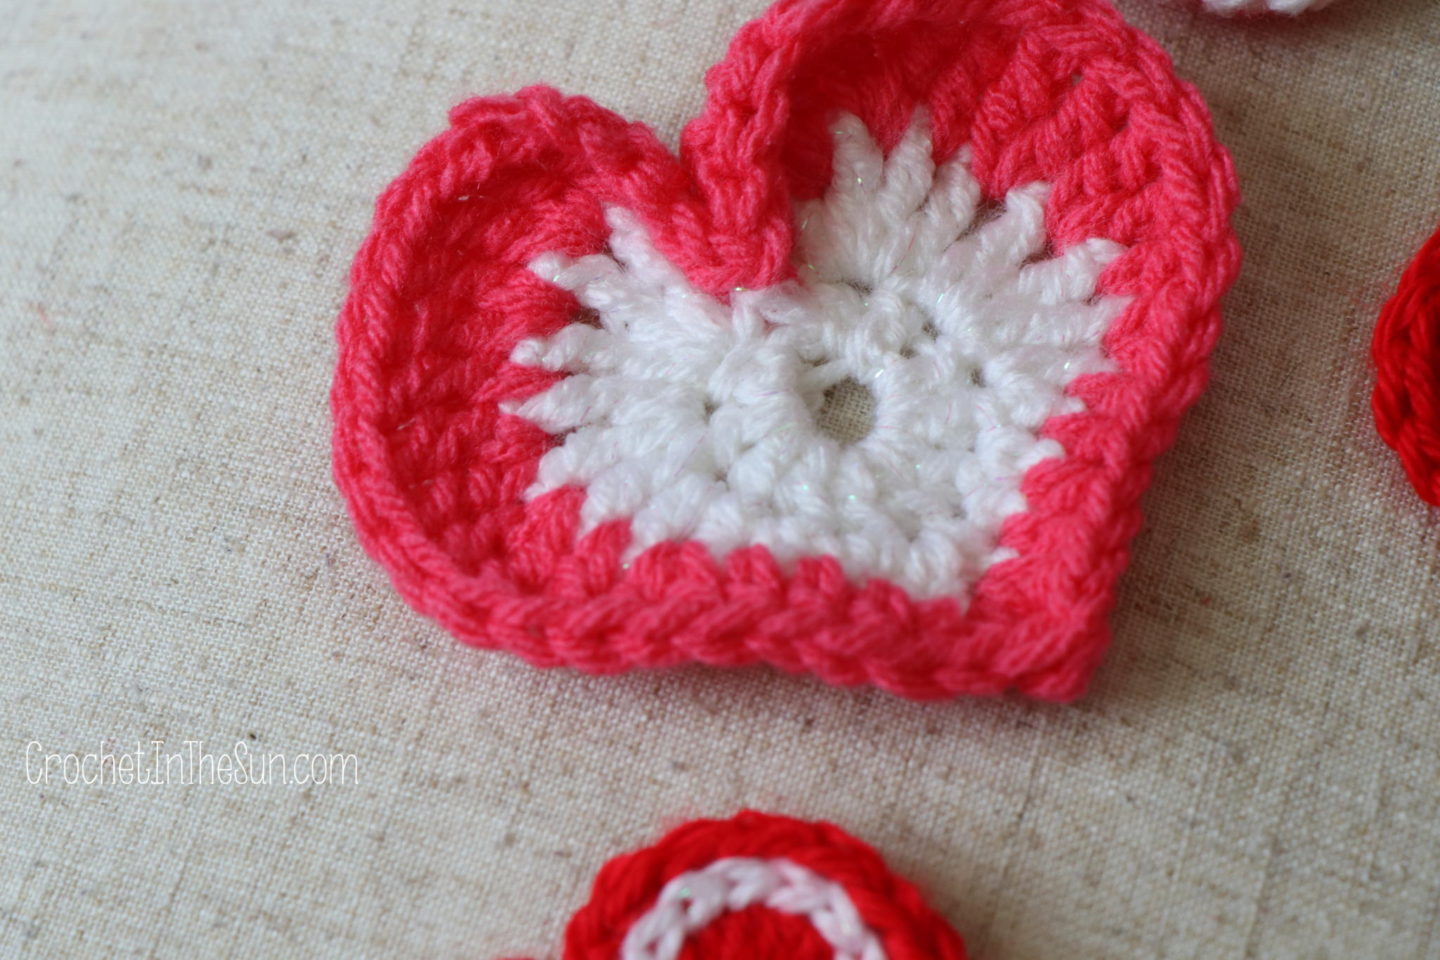 How to crochet hearts in 9 easy steps. Mix and match, repeat!